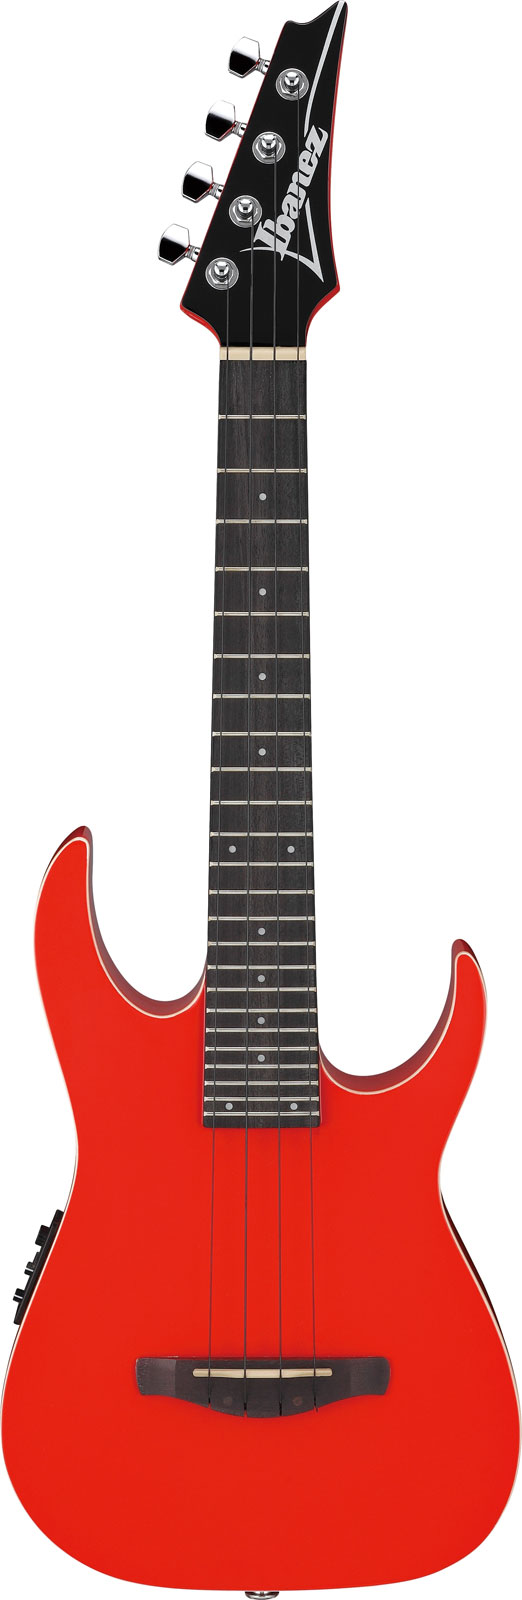 IBANEZ URGT101 SUN RED HIGH GLOSS